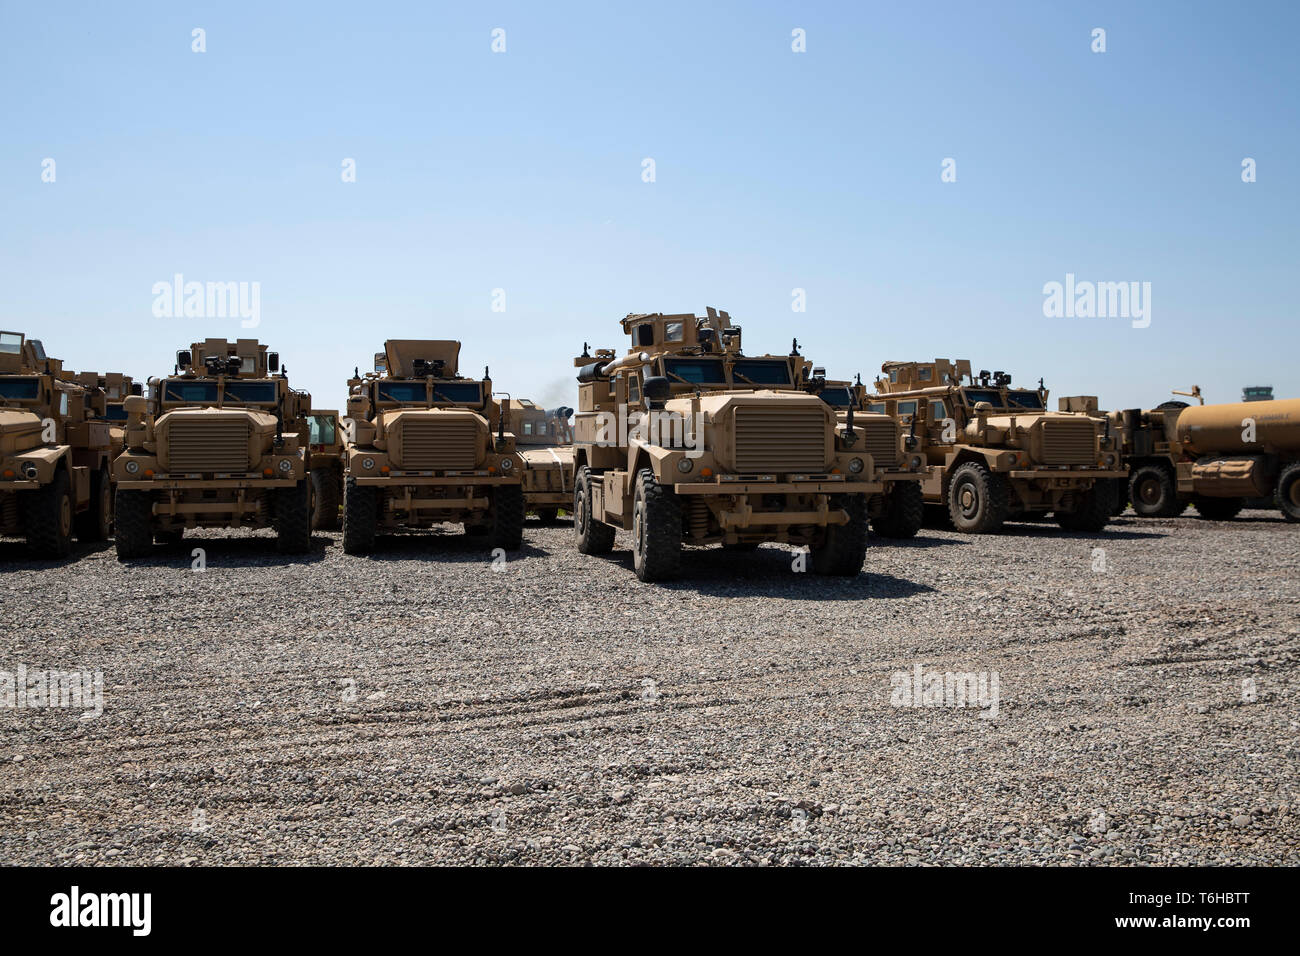 U.S. Marine Corps Cpl. Gage Peterson, a motor transport operator with Special Purpose Marine Air Ground Task Force Crisis Response-Central Command, moves a mine-resistant, ambush-protected vehicle to a staging lot in Southwest Asia, April 12, 2019. The SPMAGTF-CR-CC is a quick reaction force, prepared to deploy a variety of capabilities across the region. (U.S. Marine Corps photo by Cpl. Alina Thackray) Stock Photo